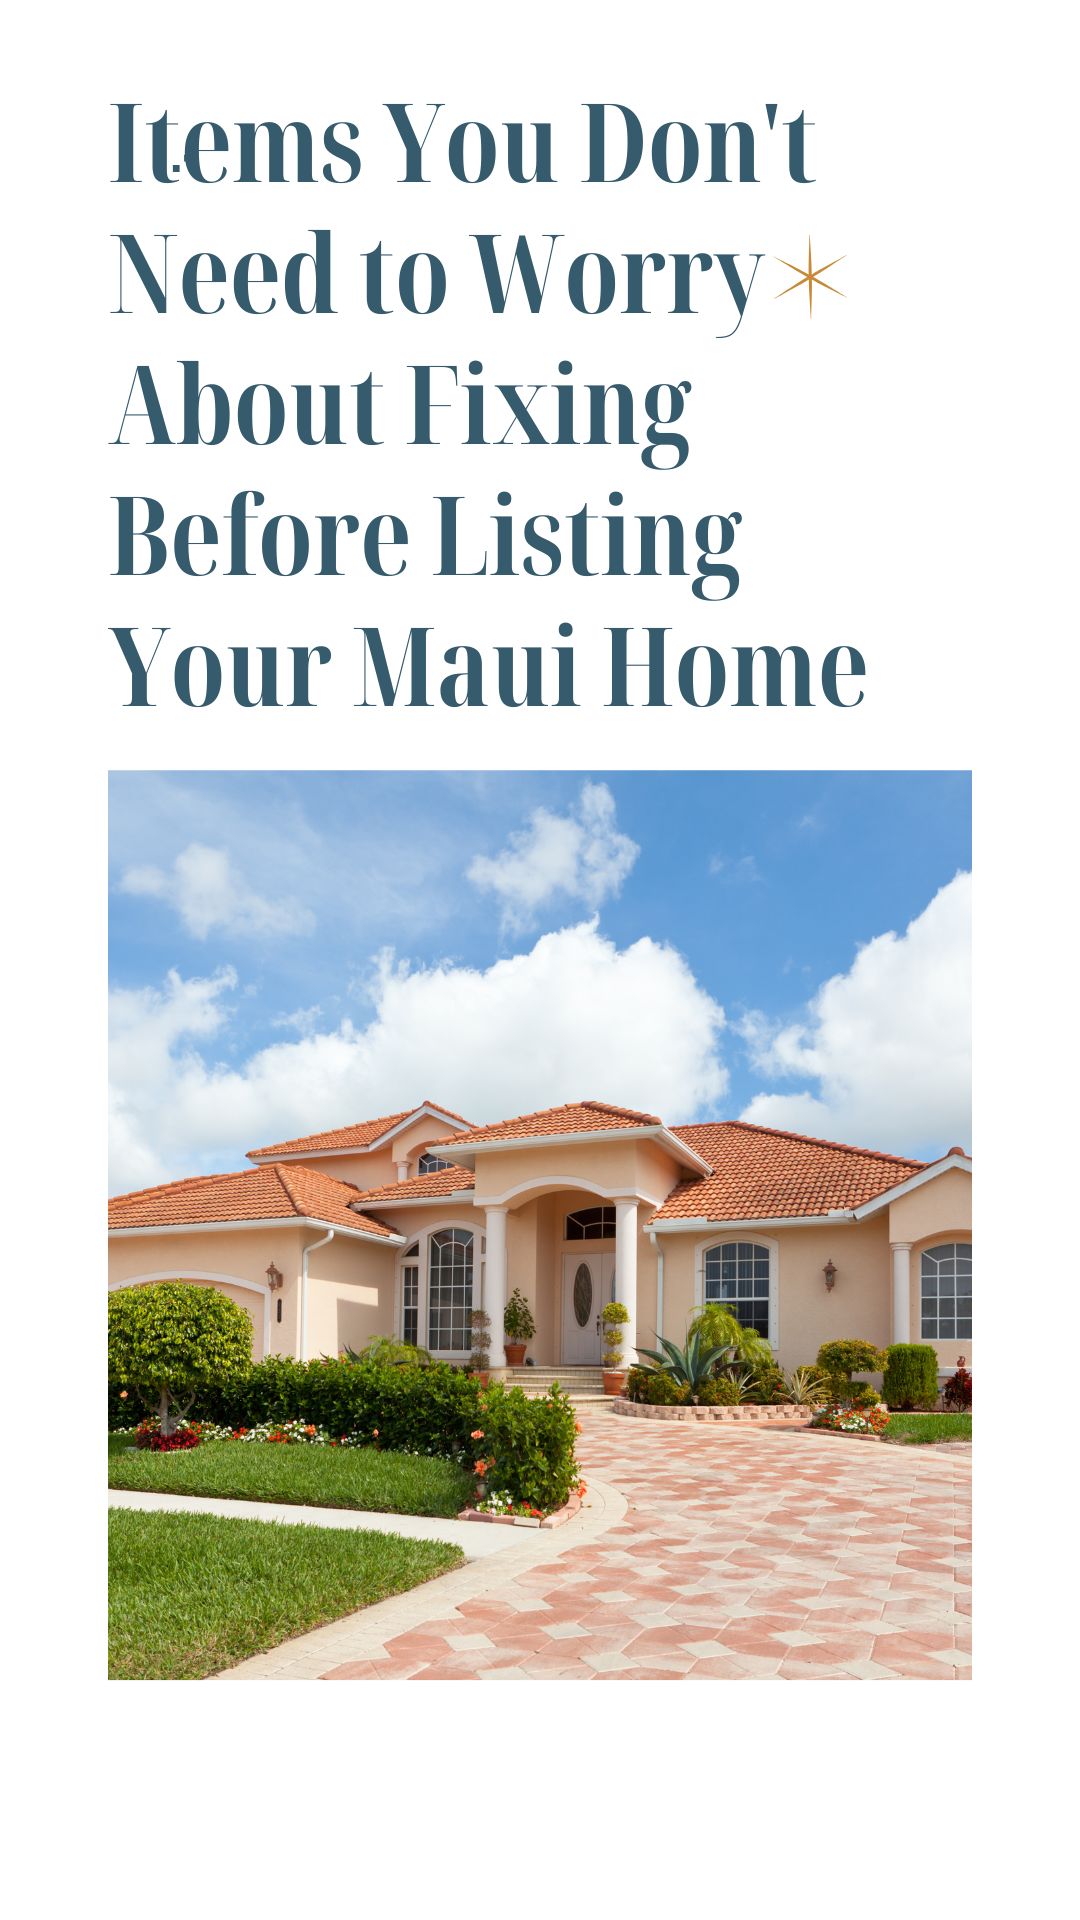 Items You Don't Need to Worry About Fixing Before Listing Your Maui Home